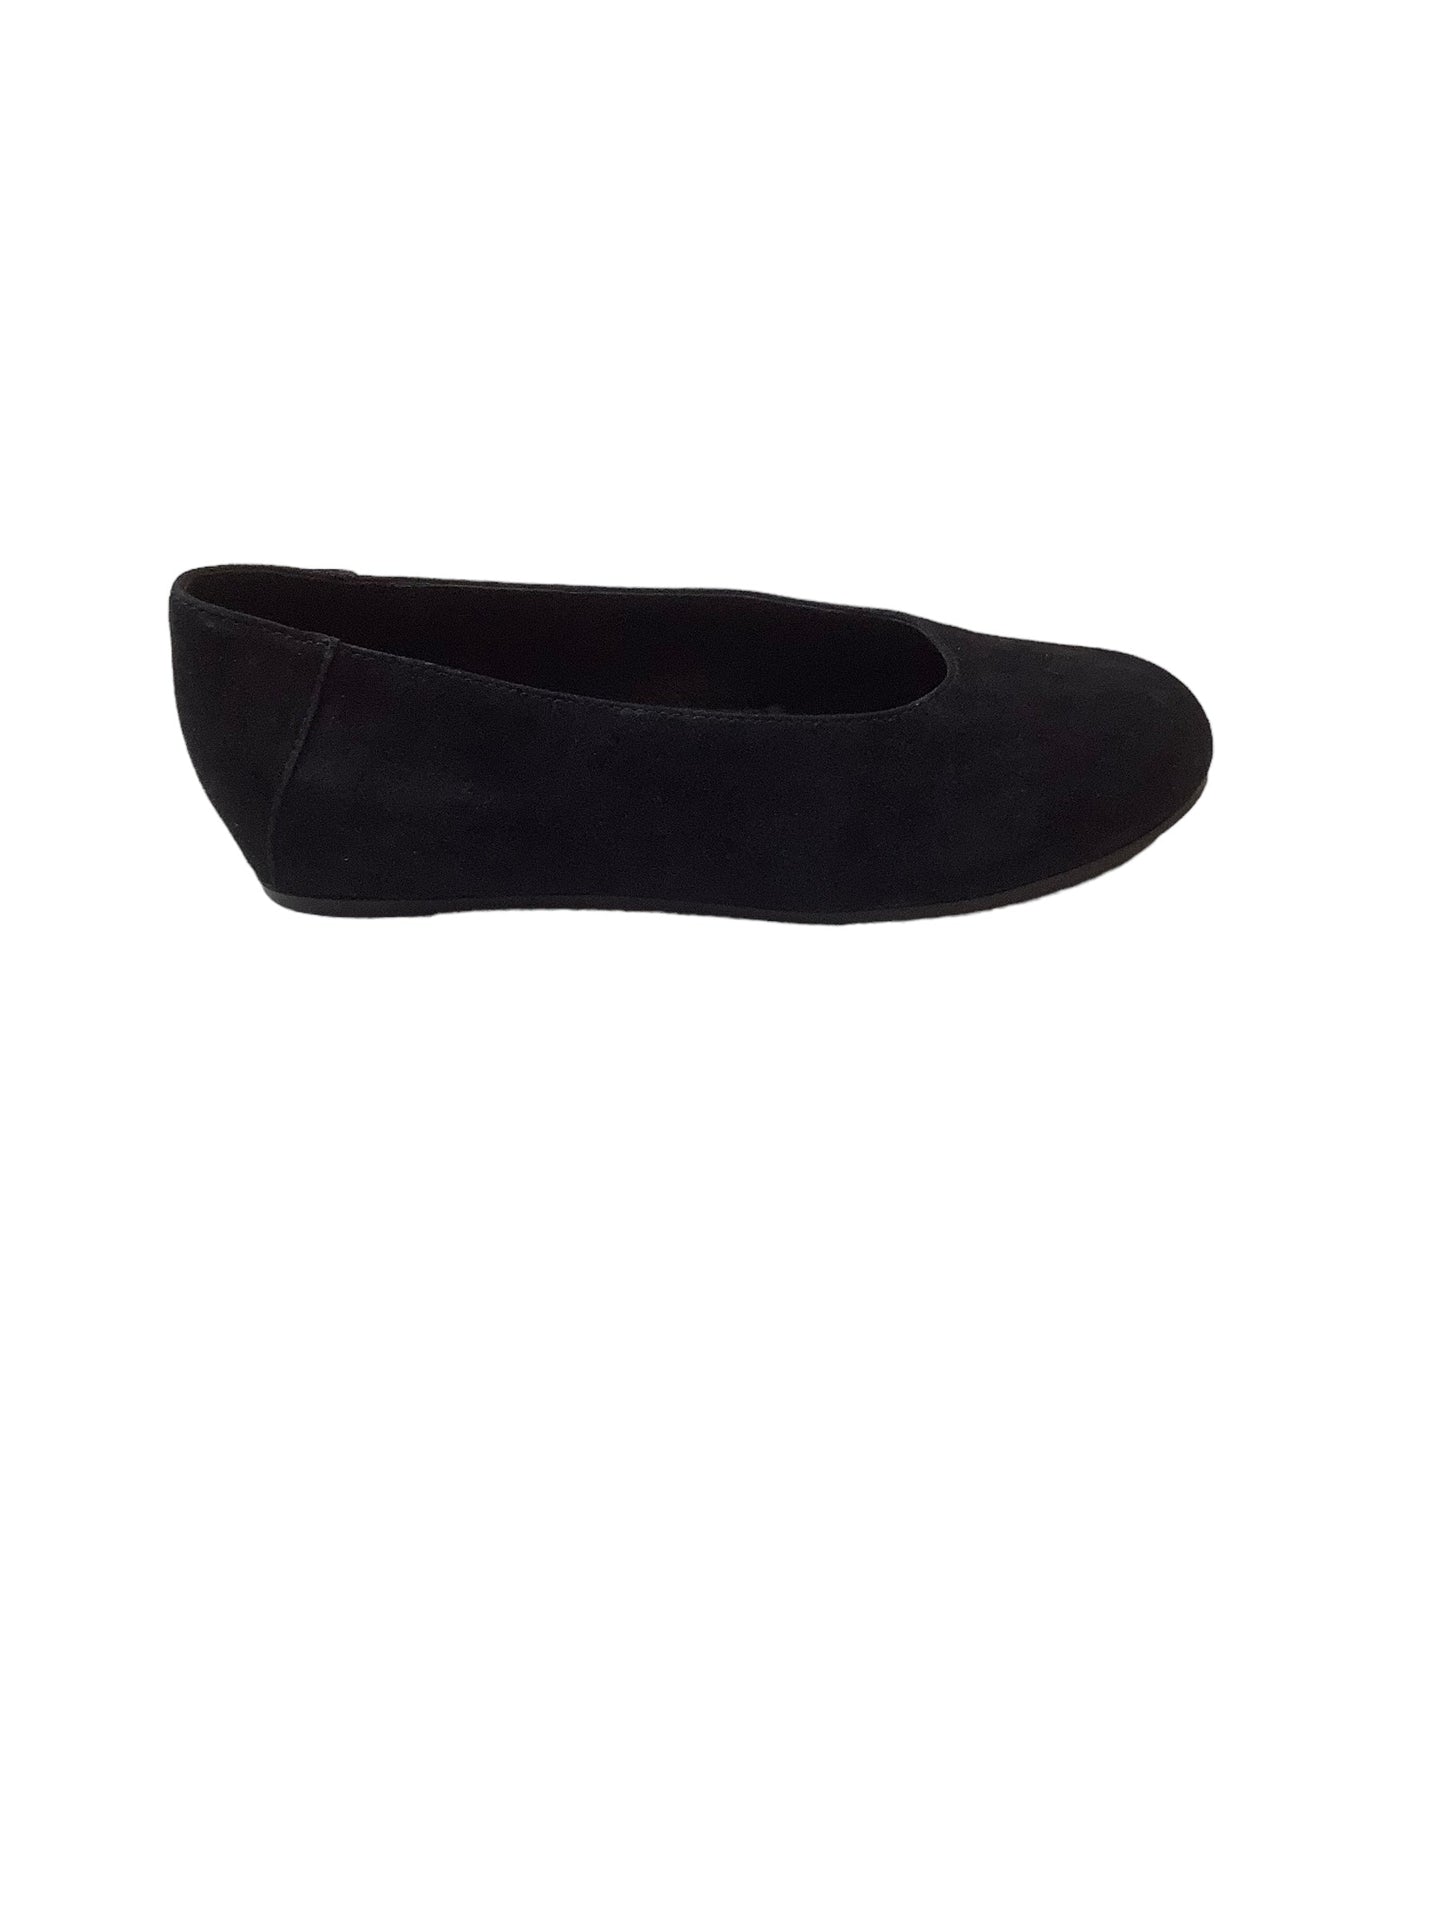 Shoes Flats Eileen Fisher, Size 7.5